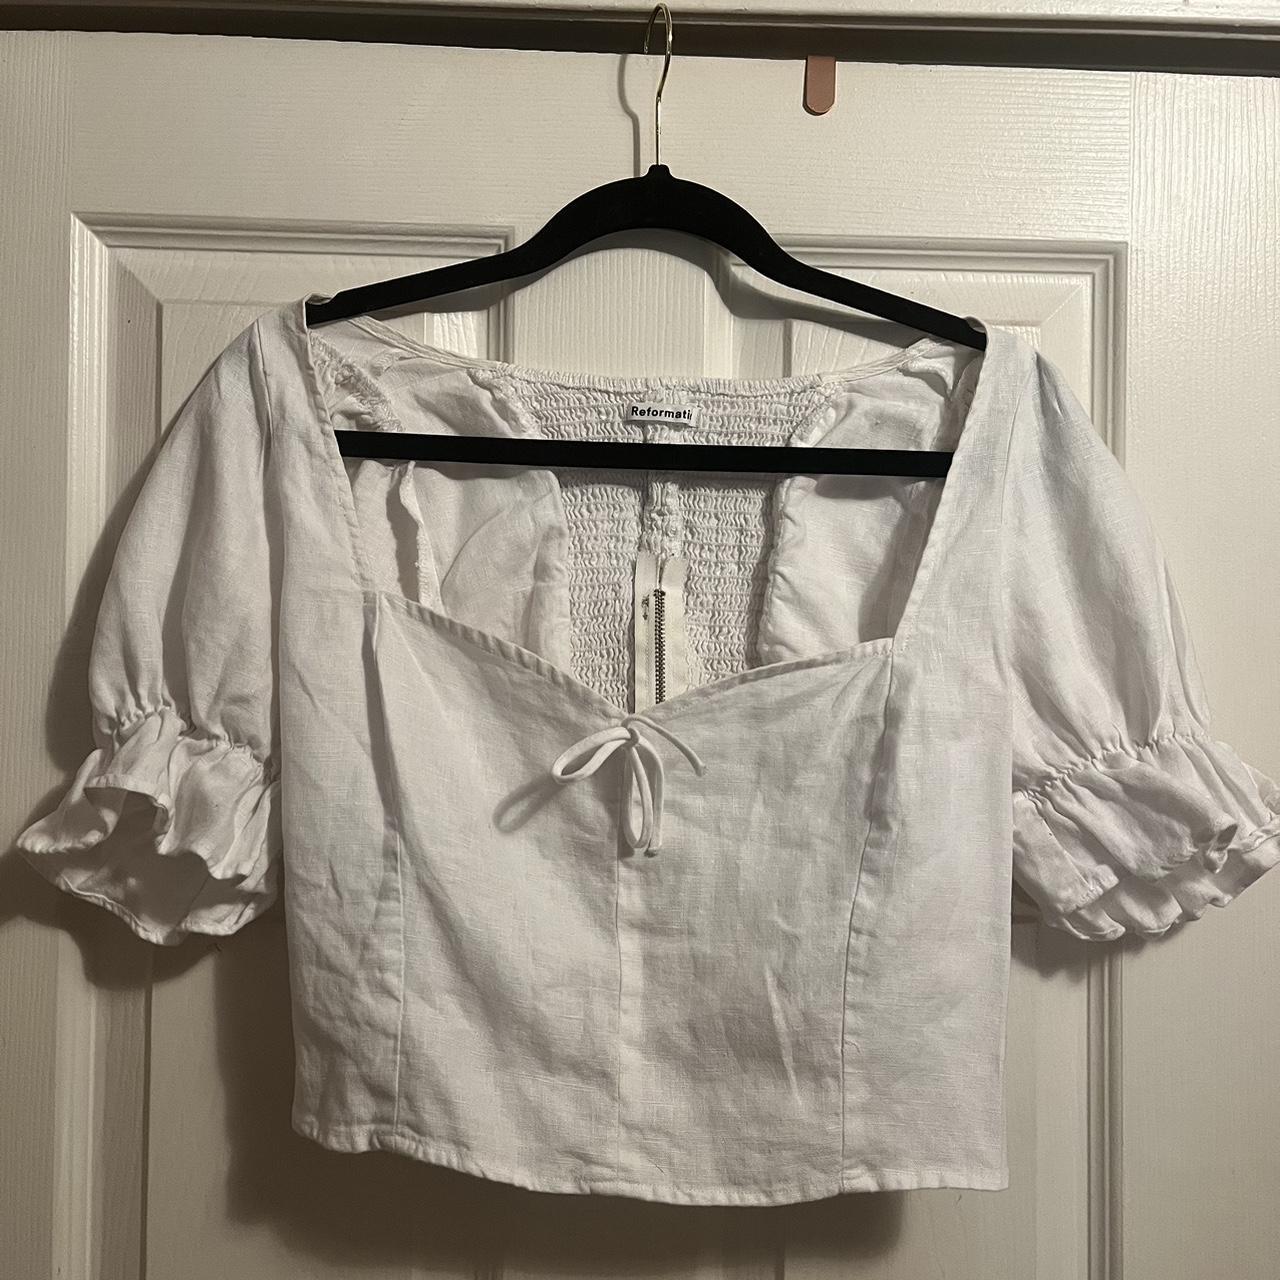 Women's Reformation Crop Tops, New & Used